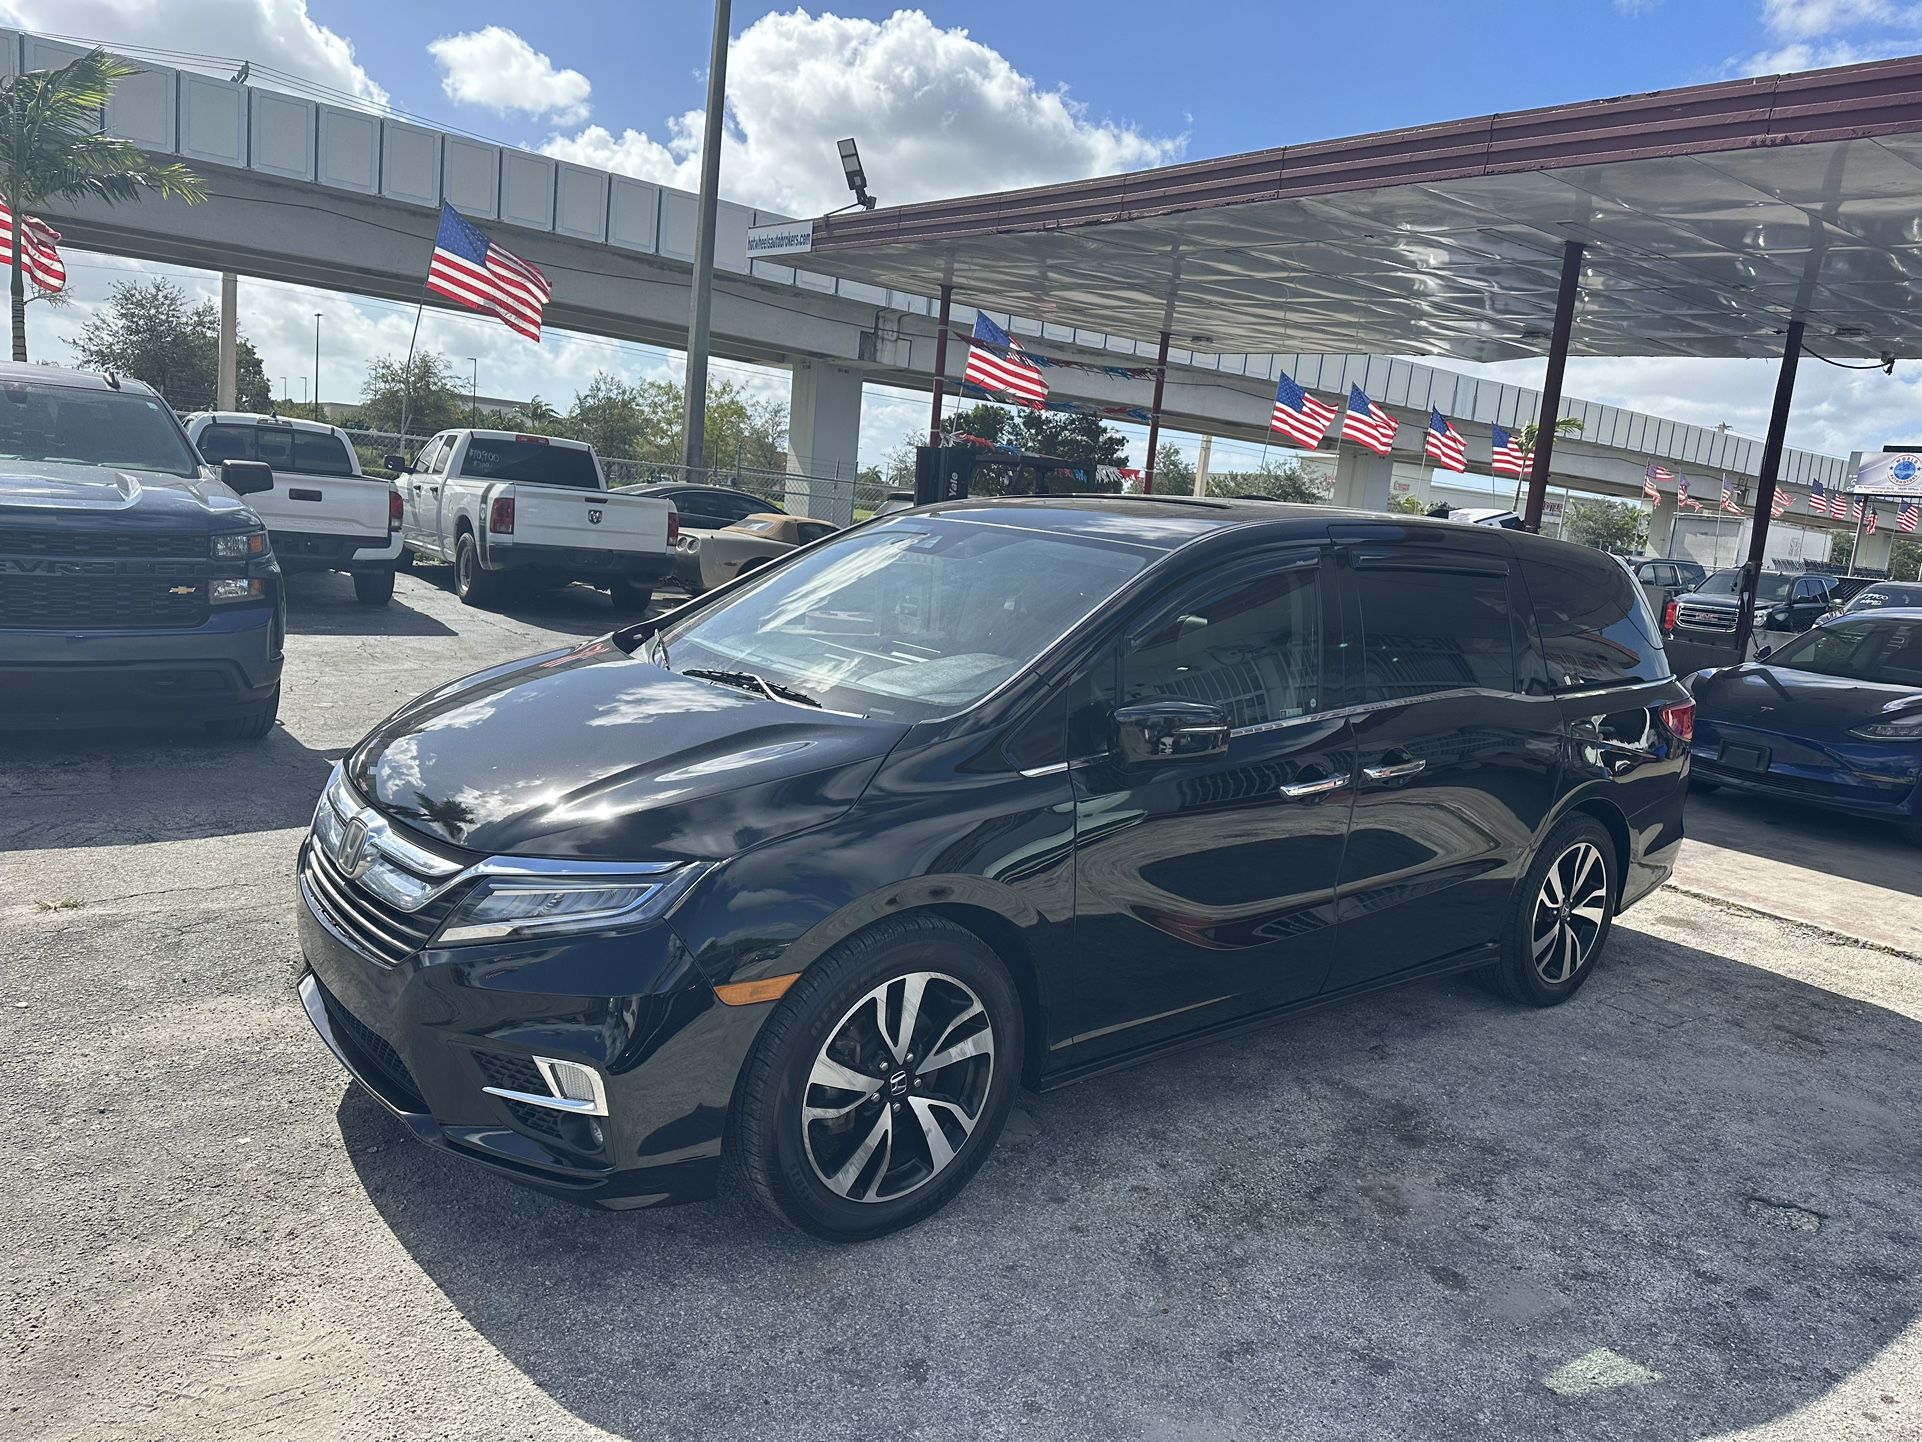 used 2018 HONDA ODOSSEY - front view 2